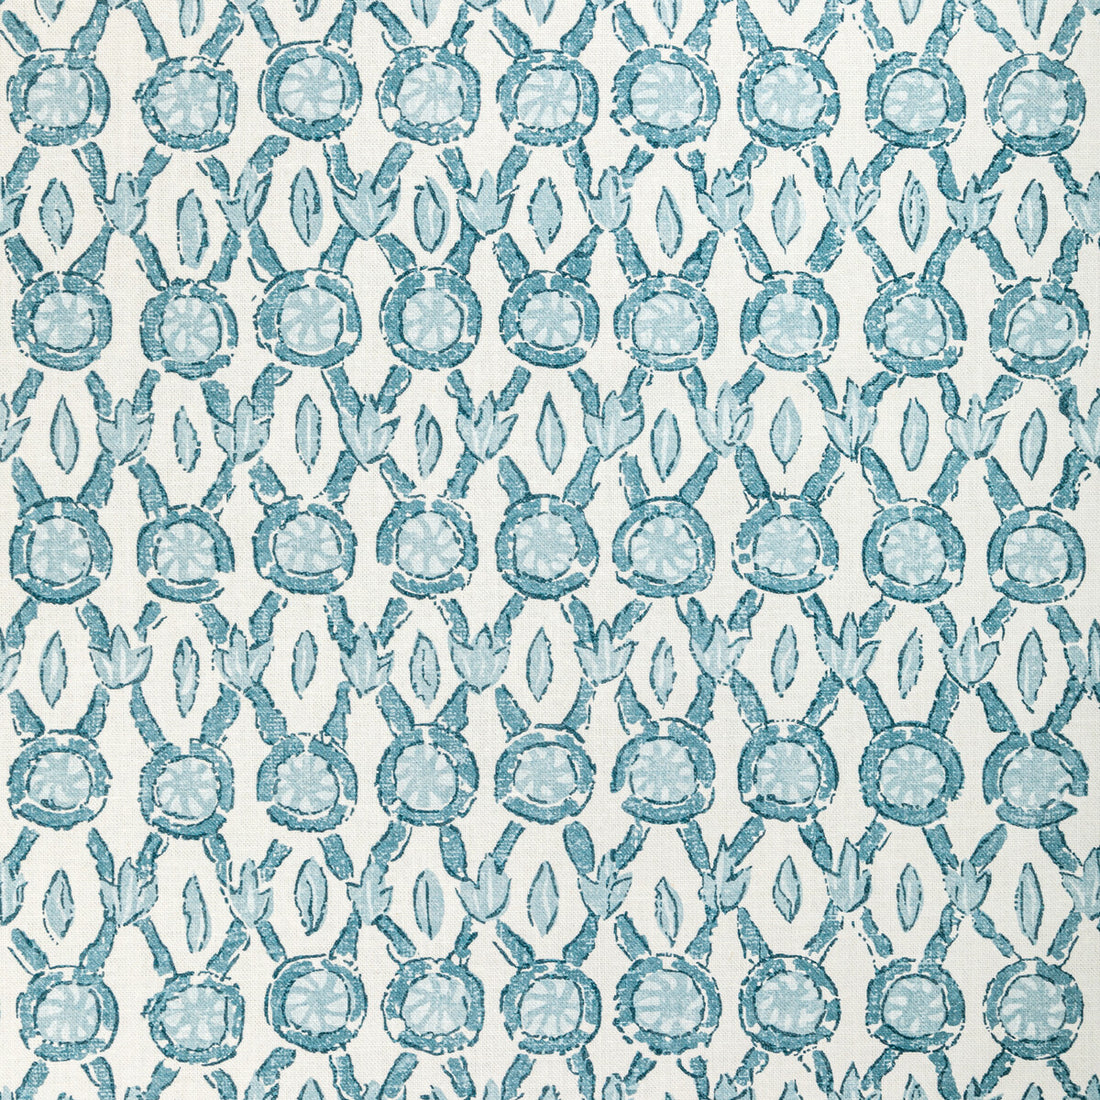 Galon Print fabric in aqua color - pattern 8022103.1313.0 - by Brunschwig &amp; Fils in the Manoir collection